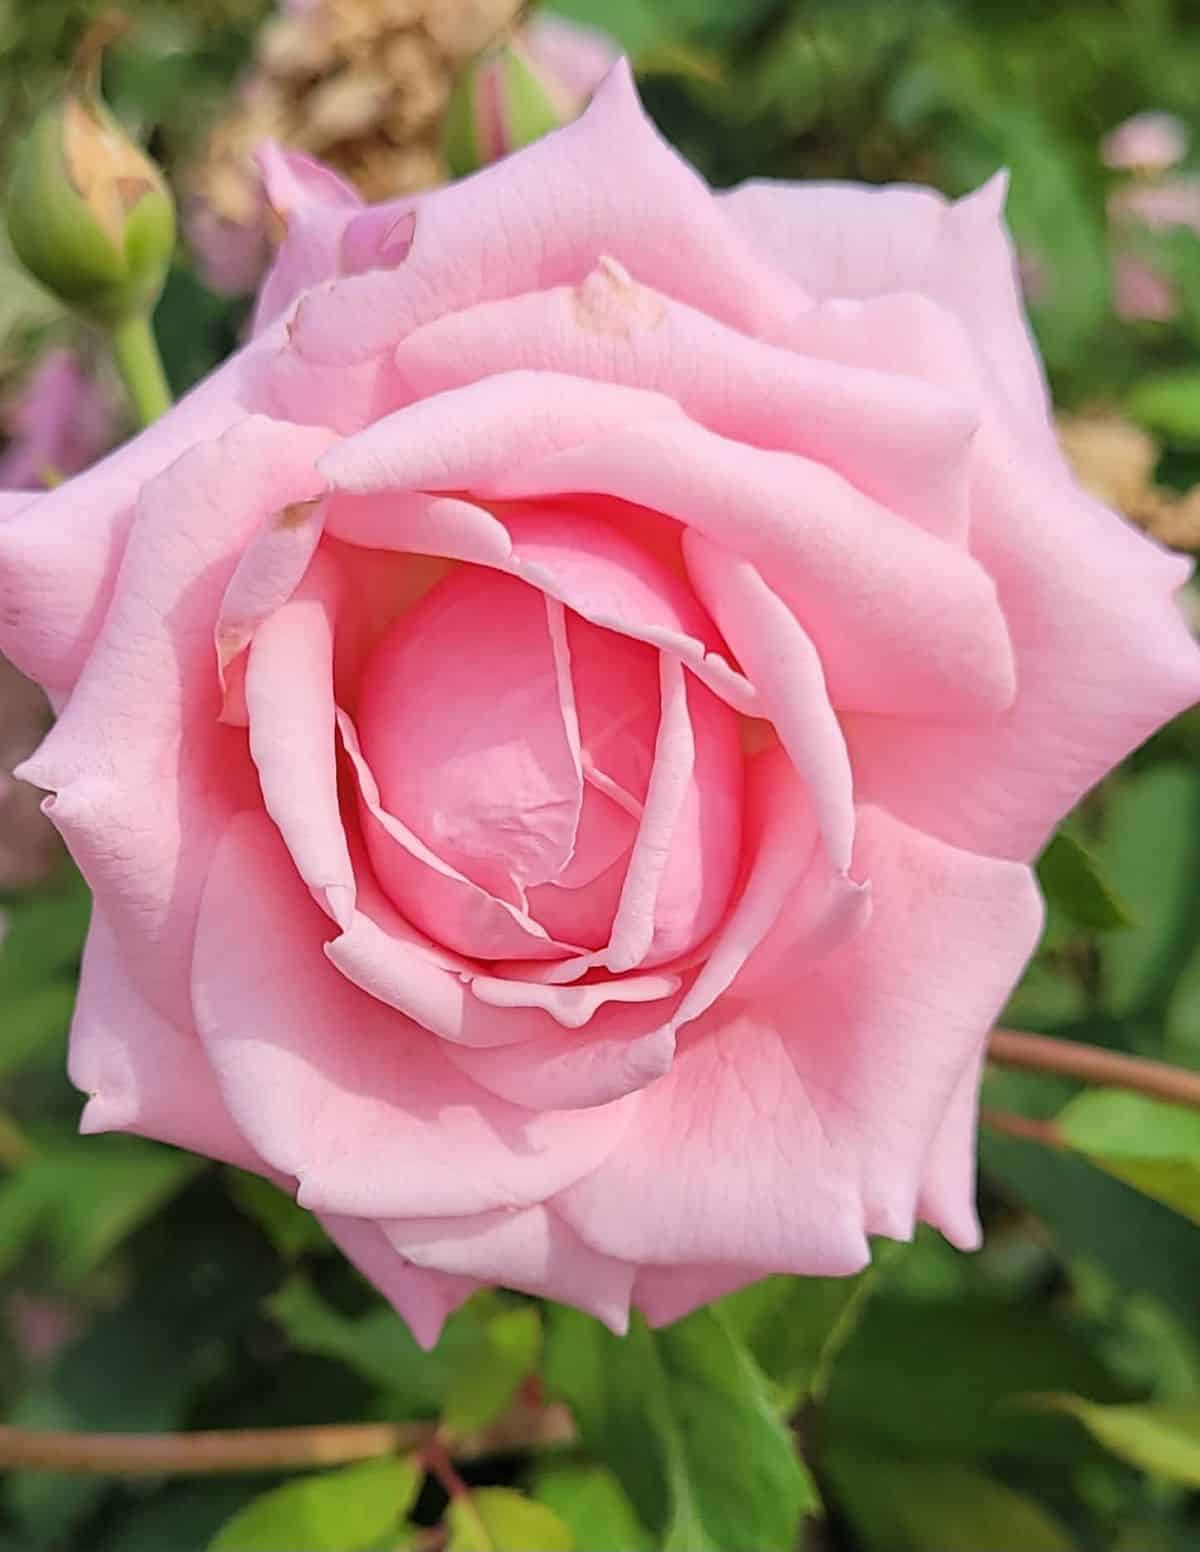 A large pink blooming rose